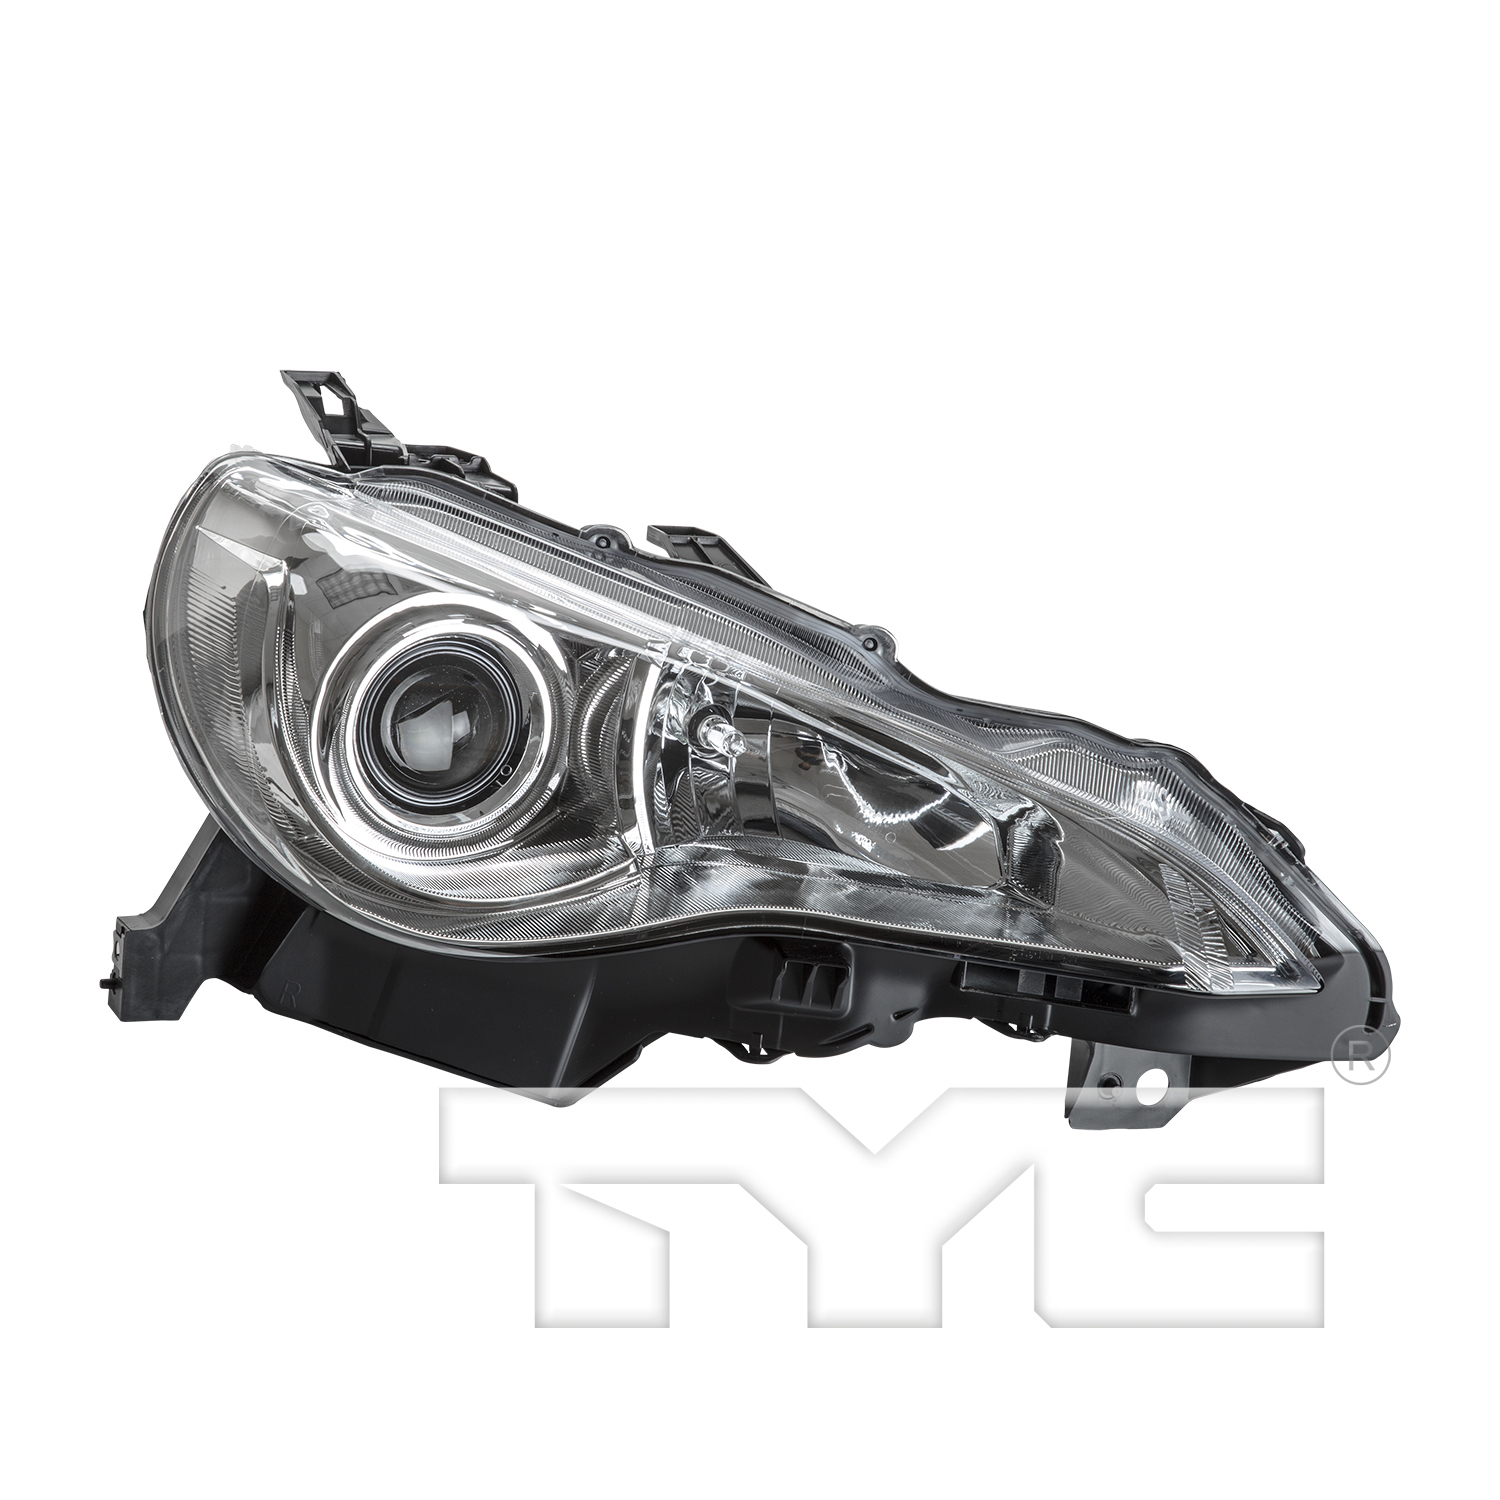 Aftermarket HEADLIGHTS for SCION - FR-S, FR-S,13-16,RT Headlamp assy composite